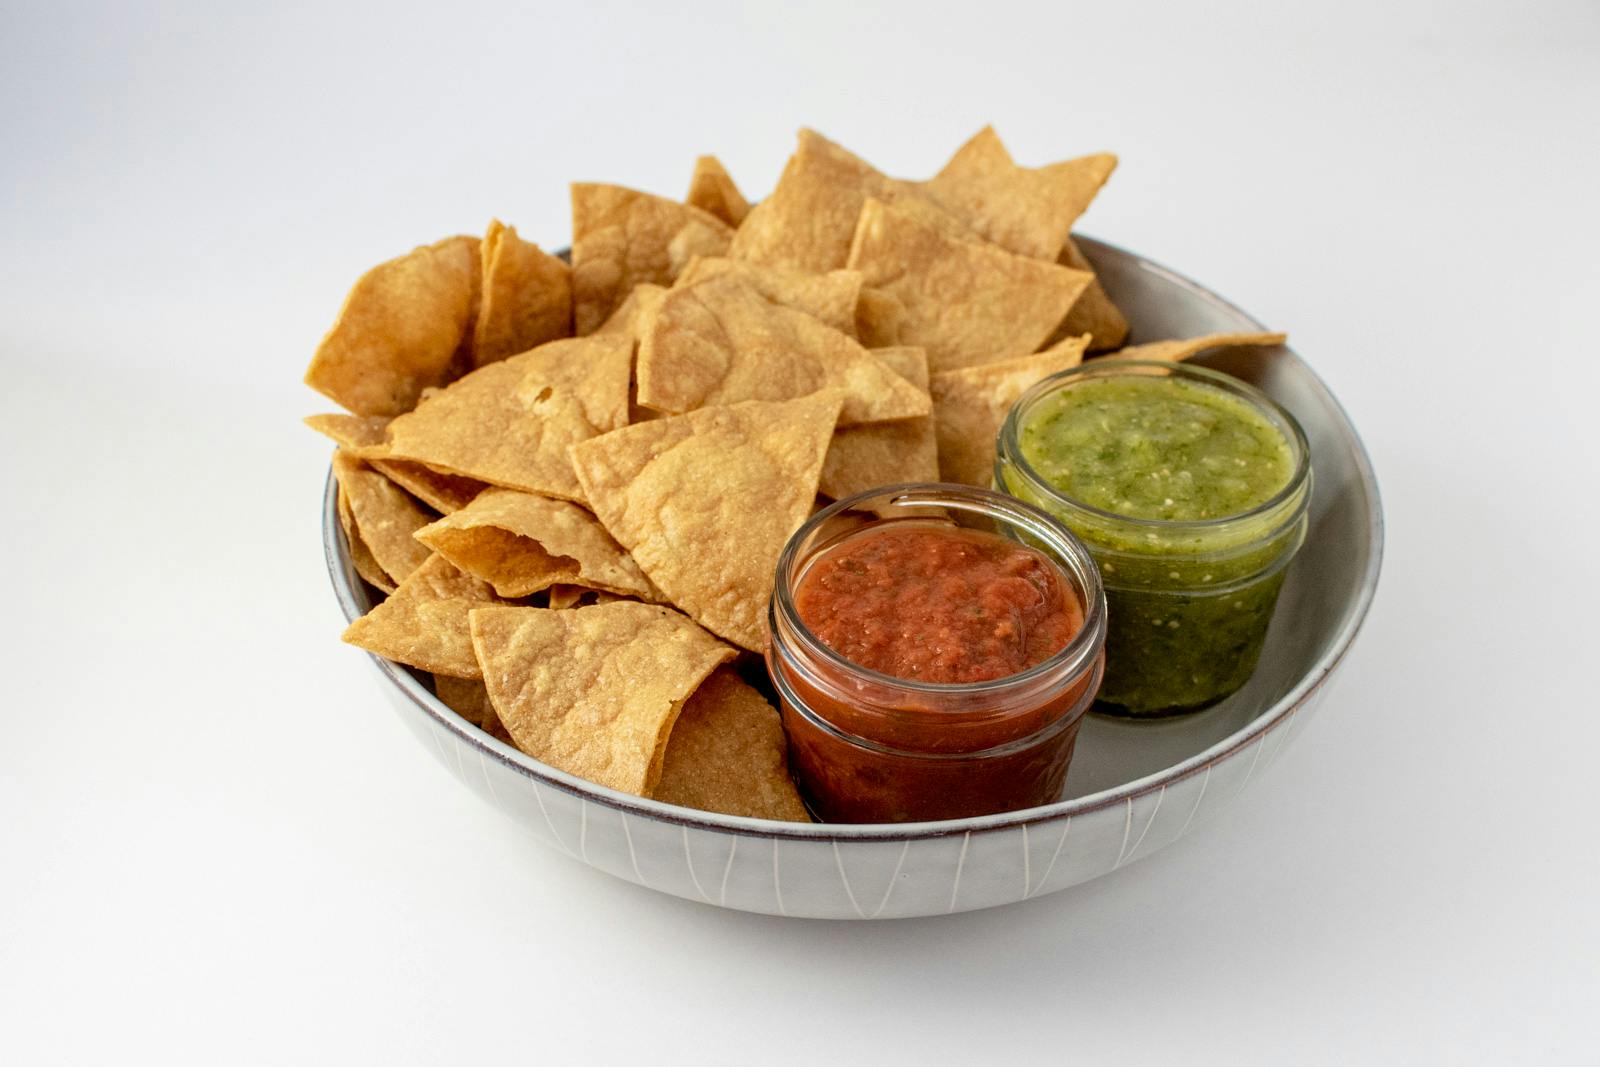 Yellow Corn Tortilla Chips and Salsas from Taco Royale - Eastside Madison in Madison, WI